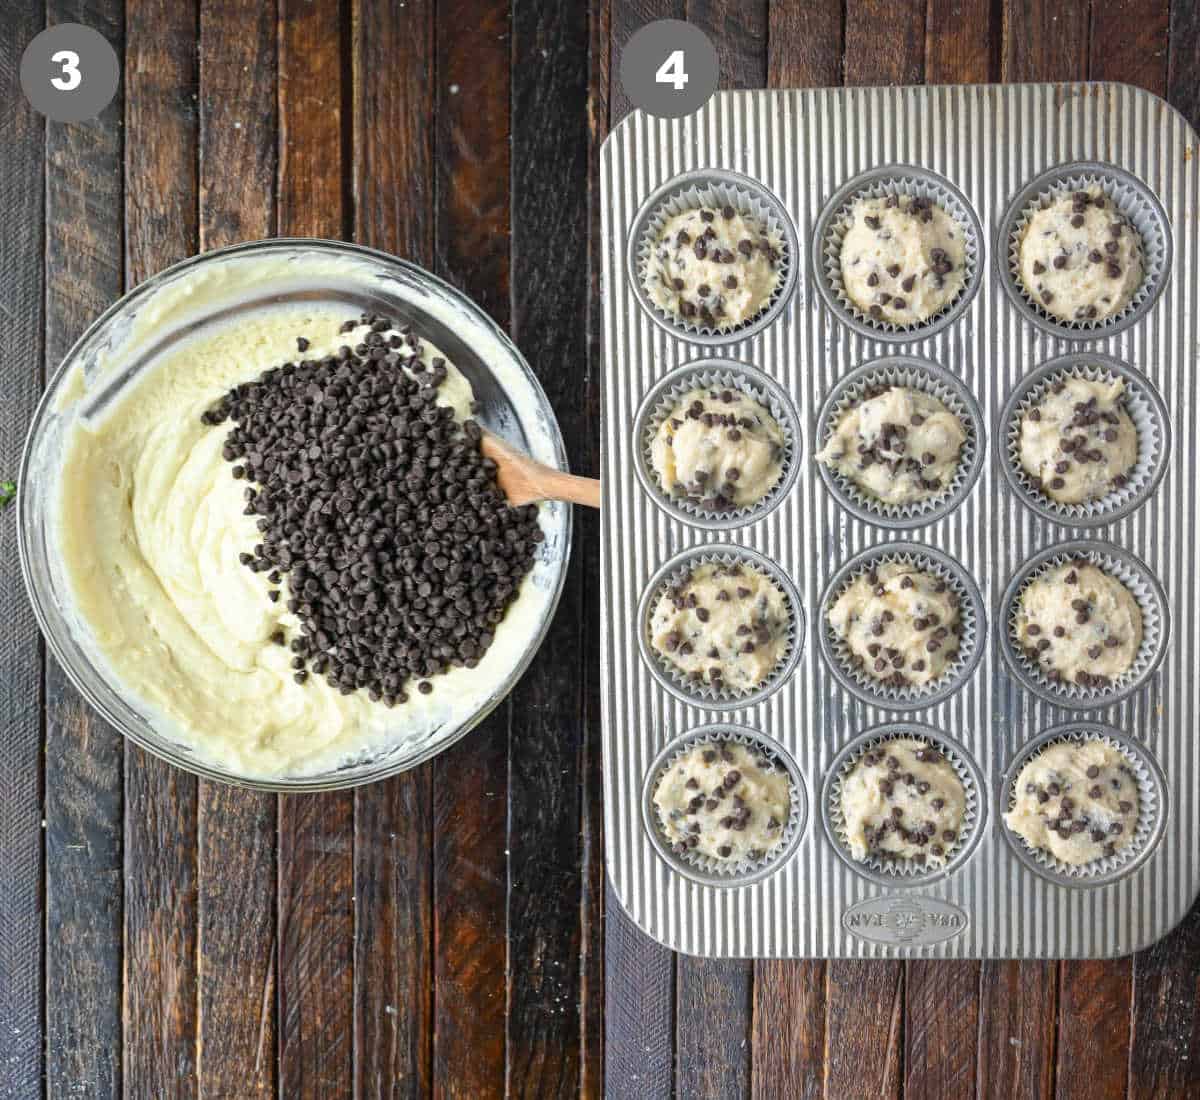 Chocolate chips folded in and batter placed into muffin tins.